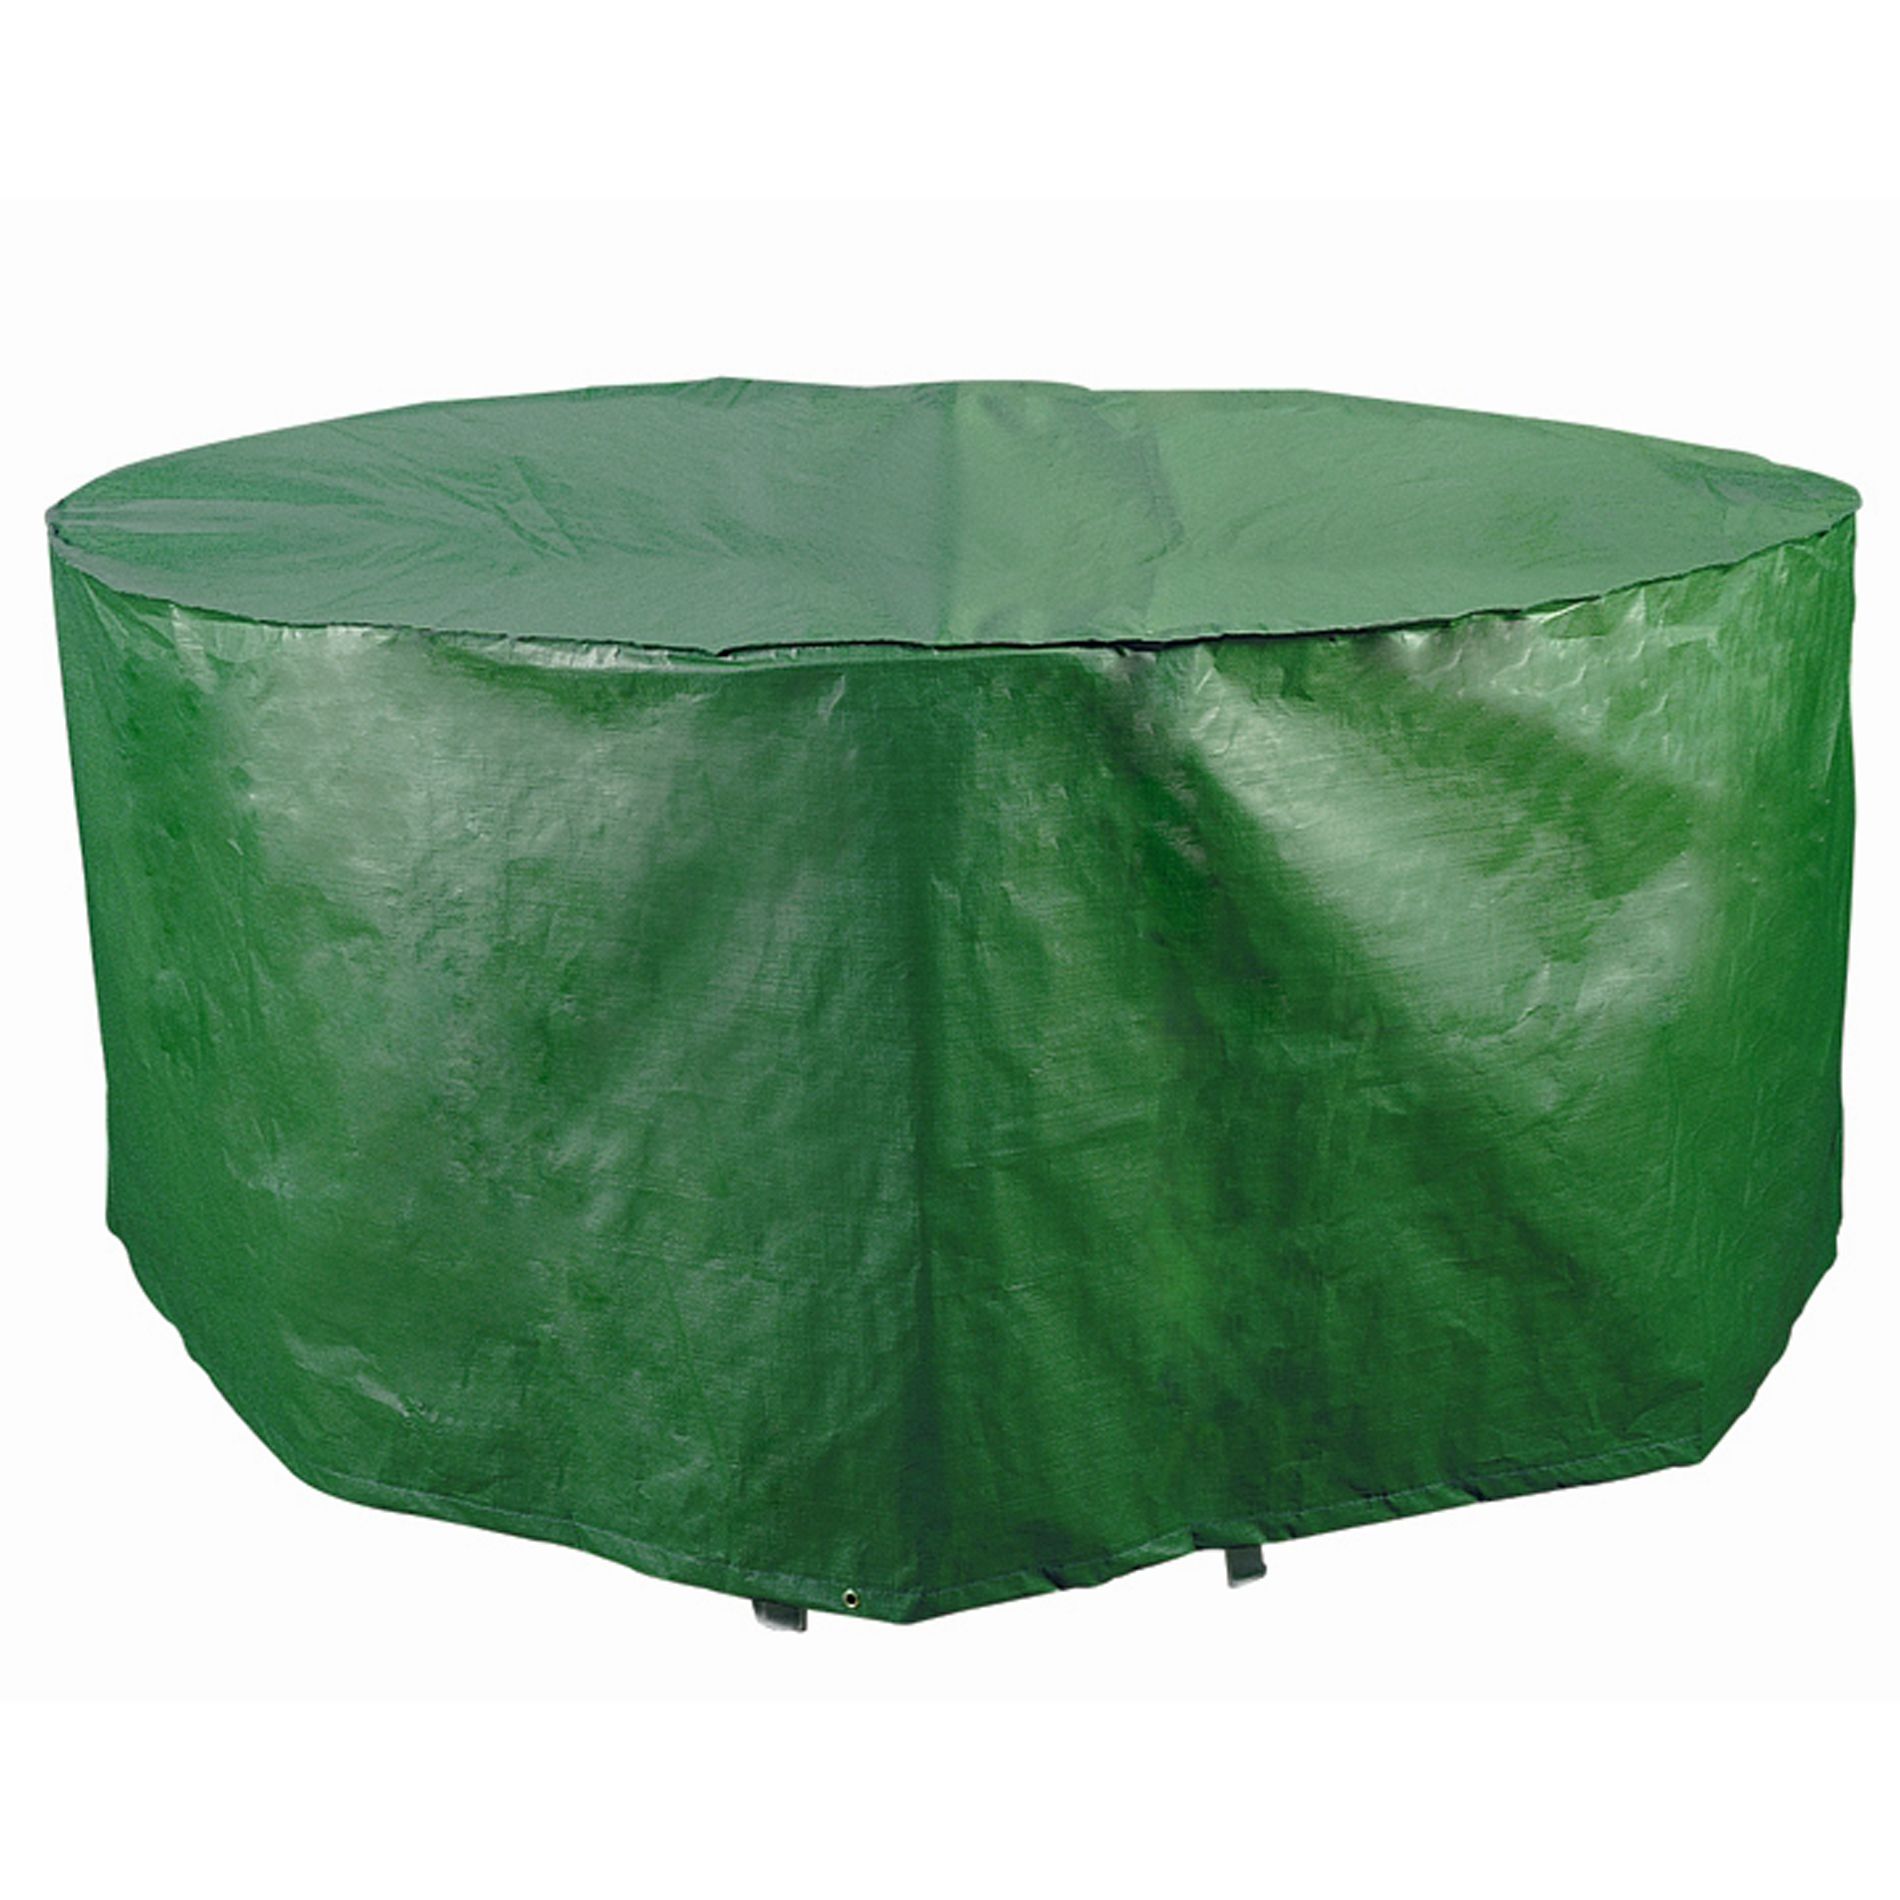 64 in. Round Patio Set Cover